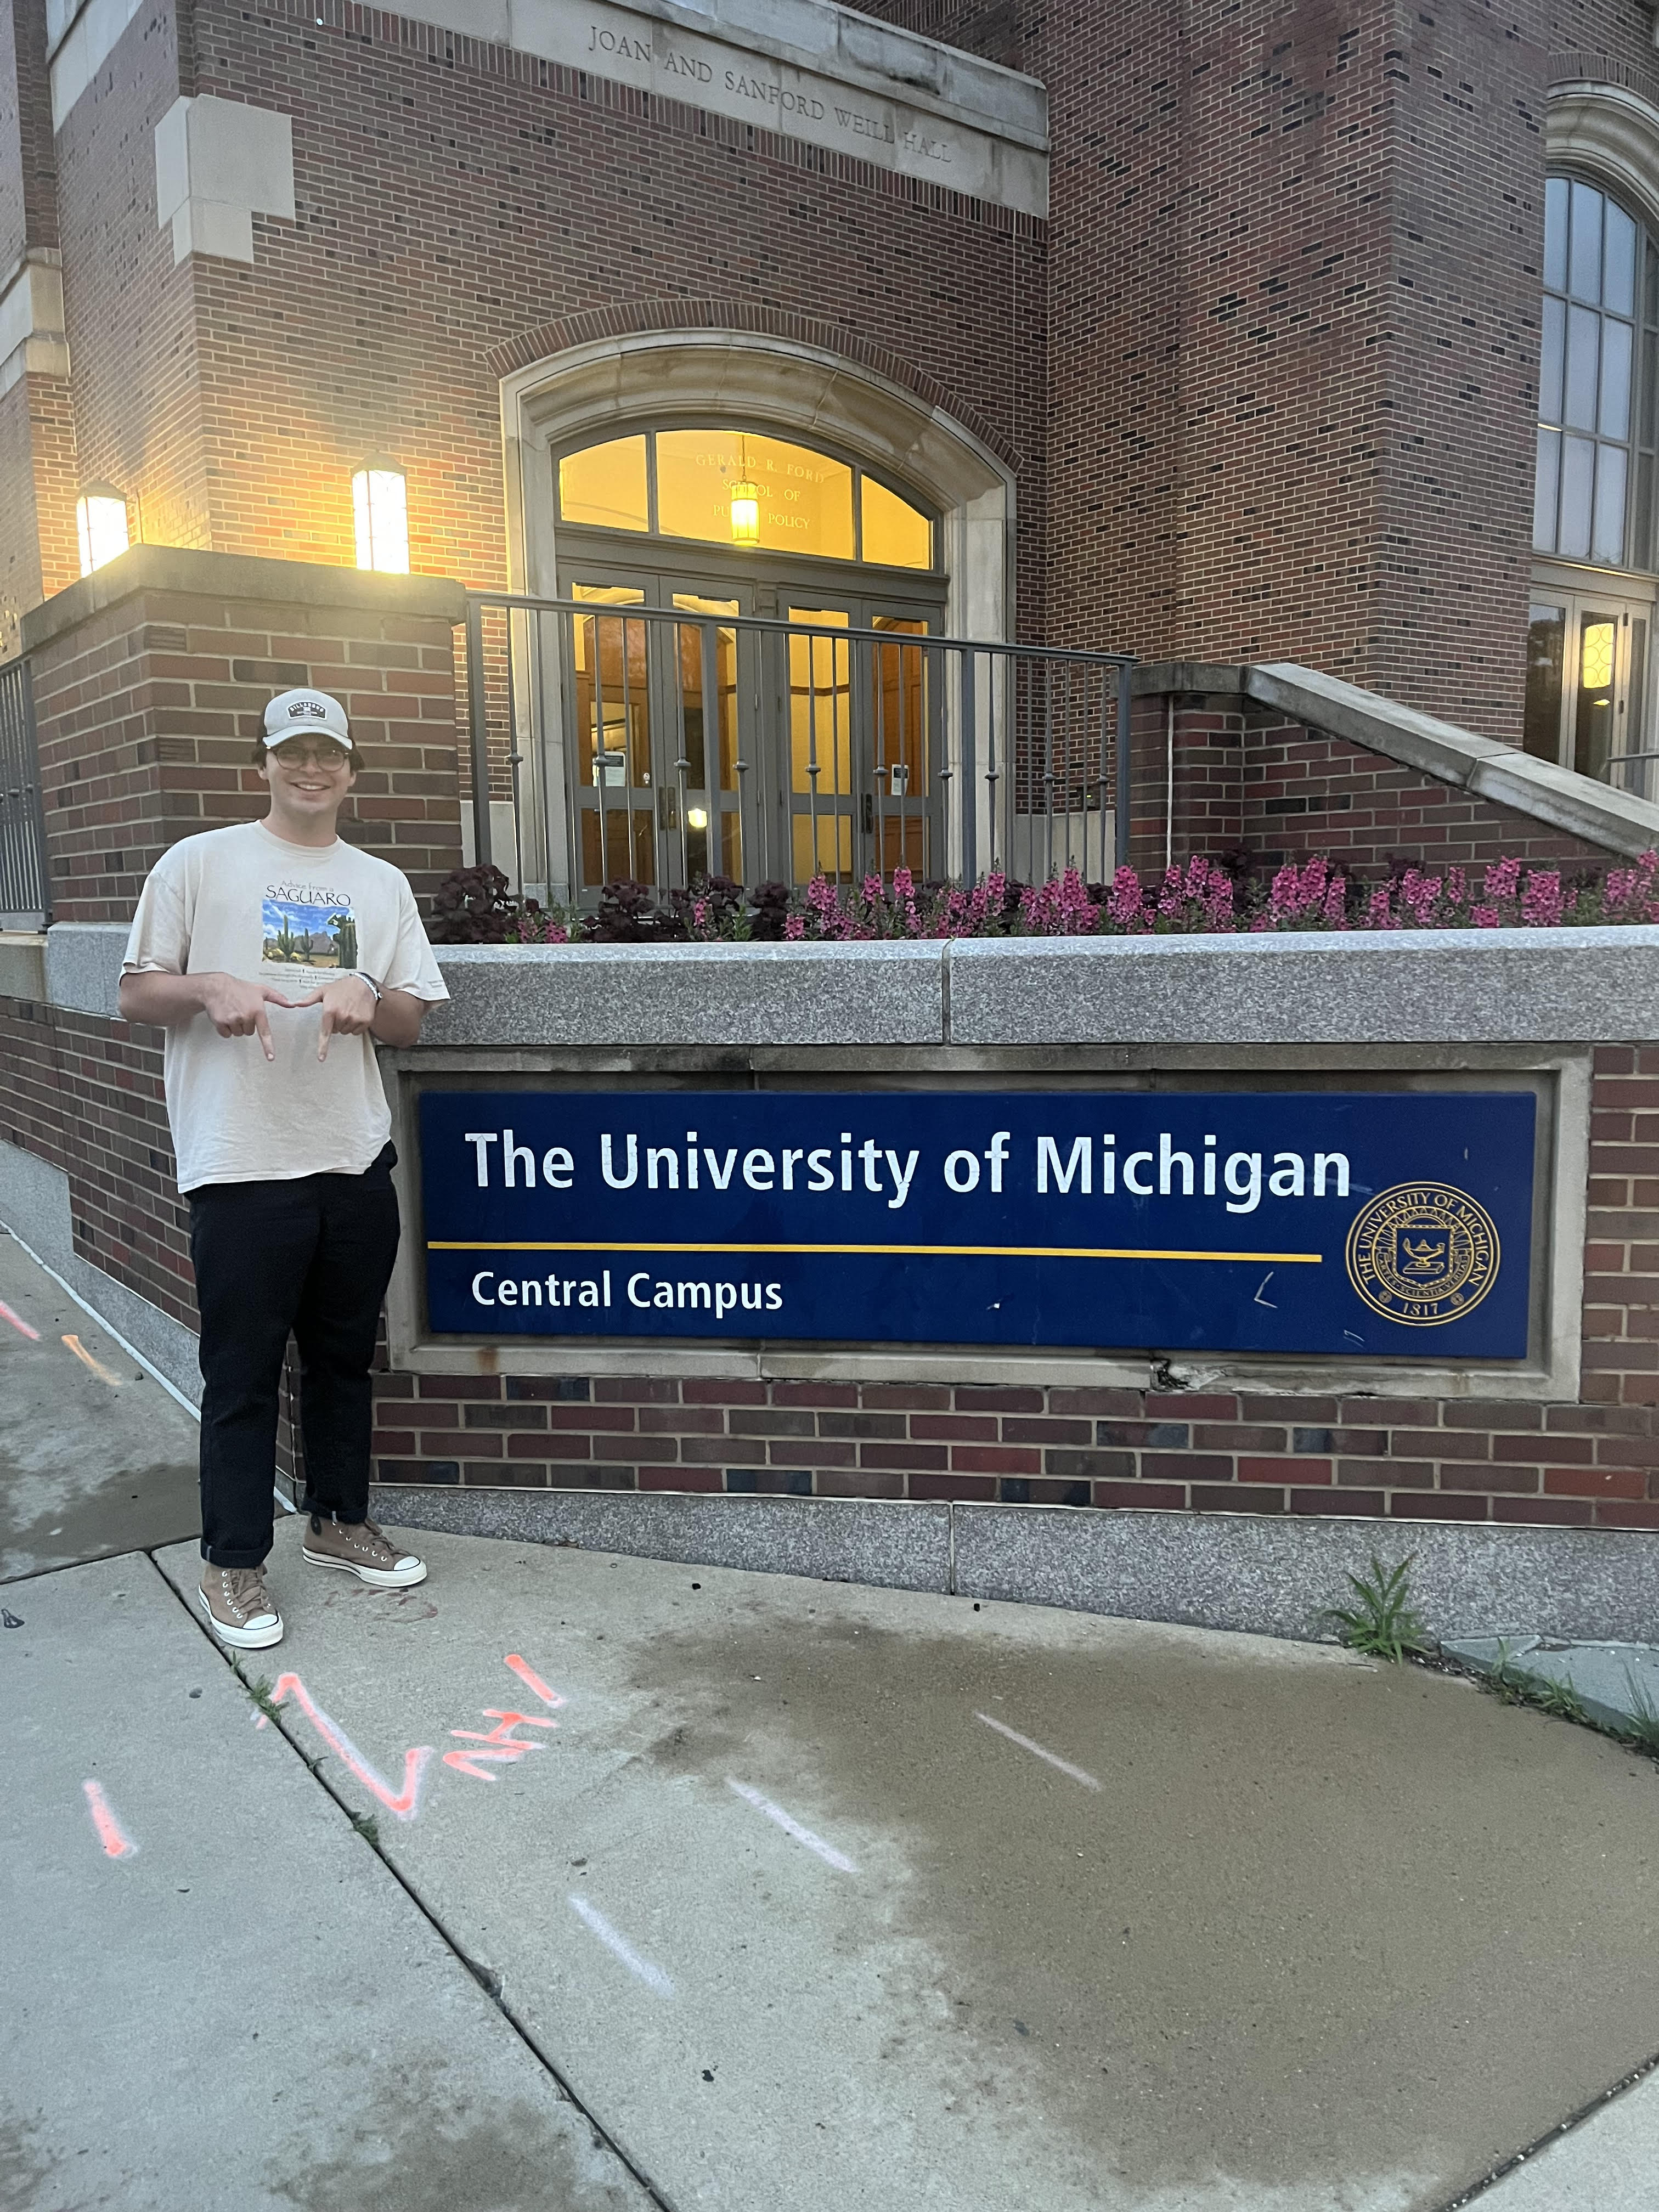 Image of me standing next to University of Michigan sign